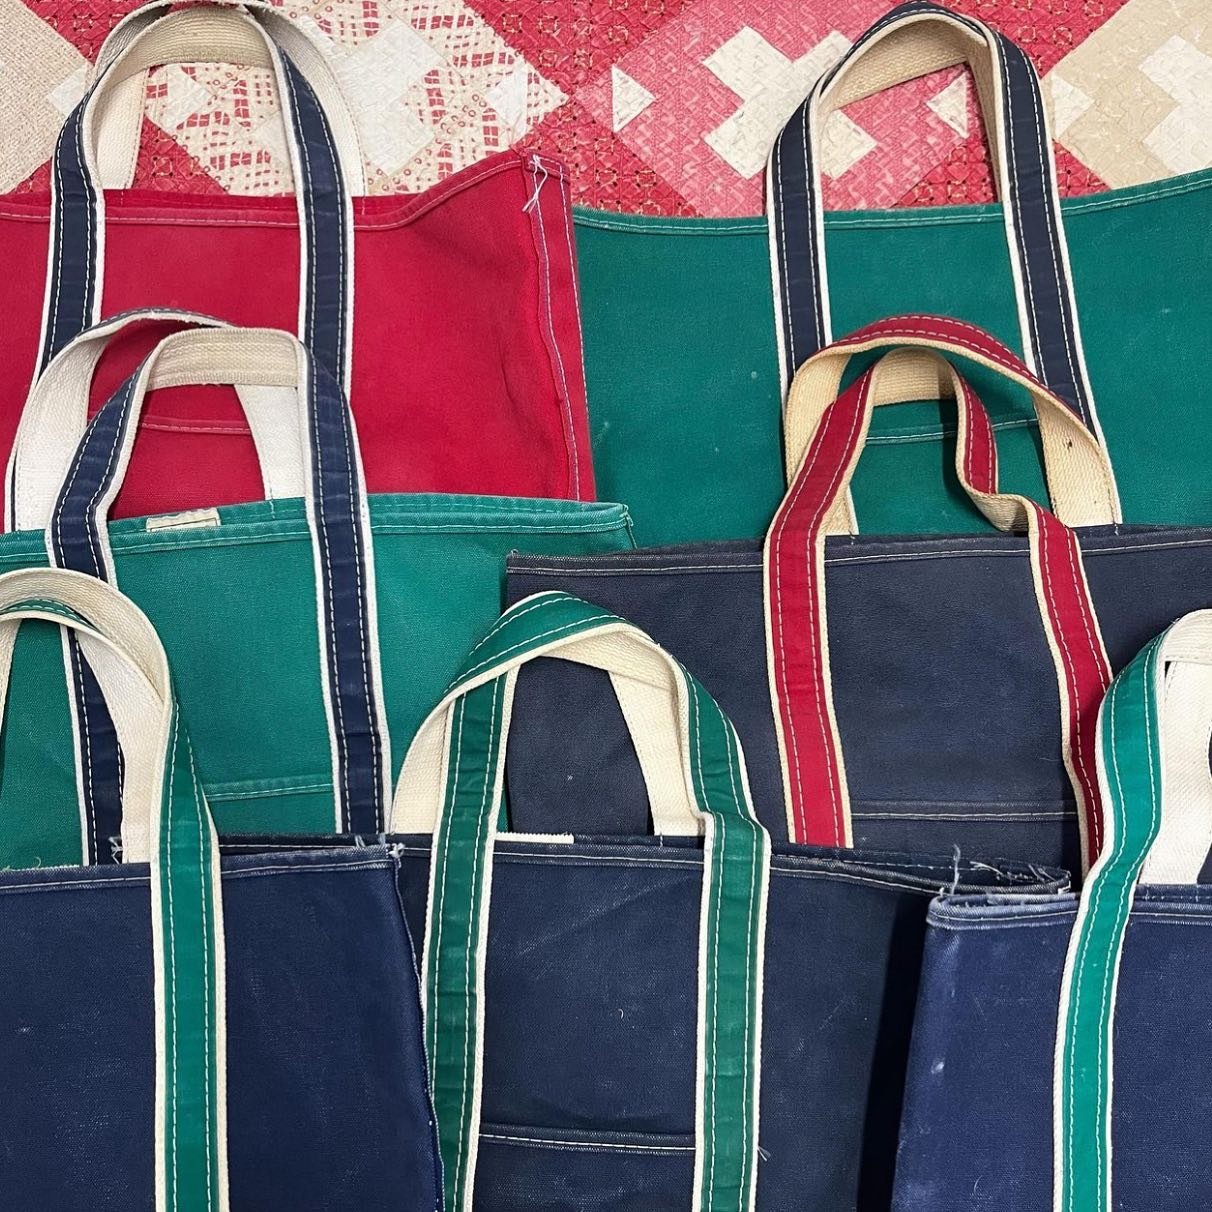 THE ART OF TOTE WRANGLING WITH @duncegallery 
🛄🛄🛄WELCOME TO THE BVE!💙💙💙

The Baltimore Vintage Expo is a highly curated one-day-only event celebrating the thriving community of exclusively vintage &amp; antique sellers in &amp; around the Maryl